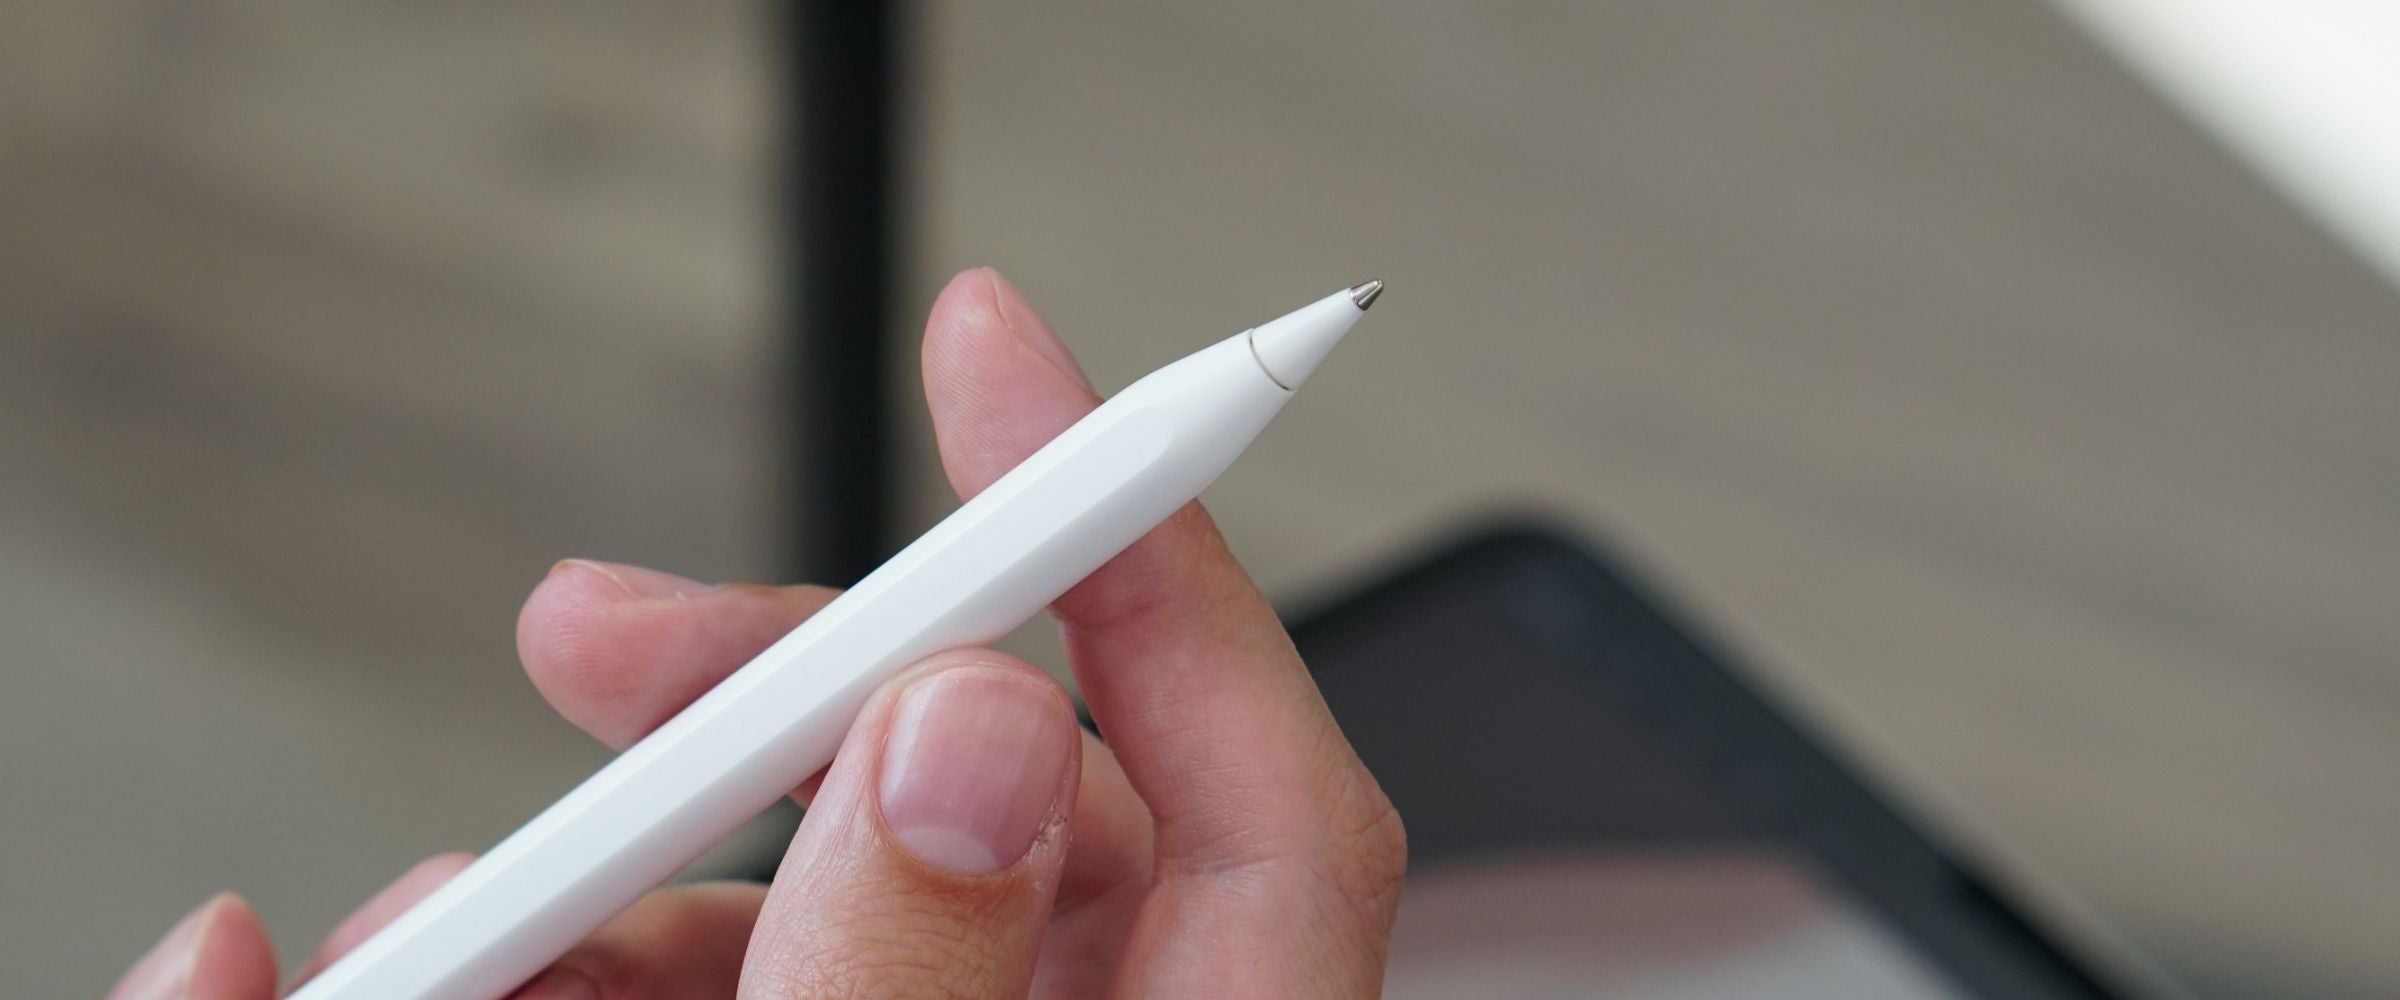 Apple Pencil Tips for Drawing: What Tip Should You Get? + Quiz